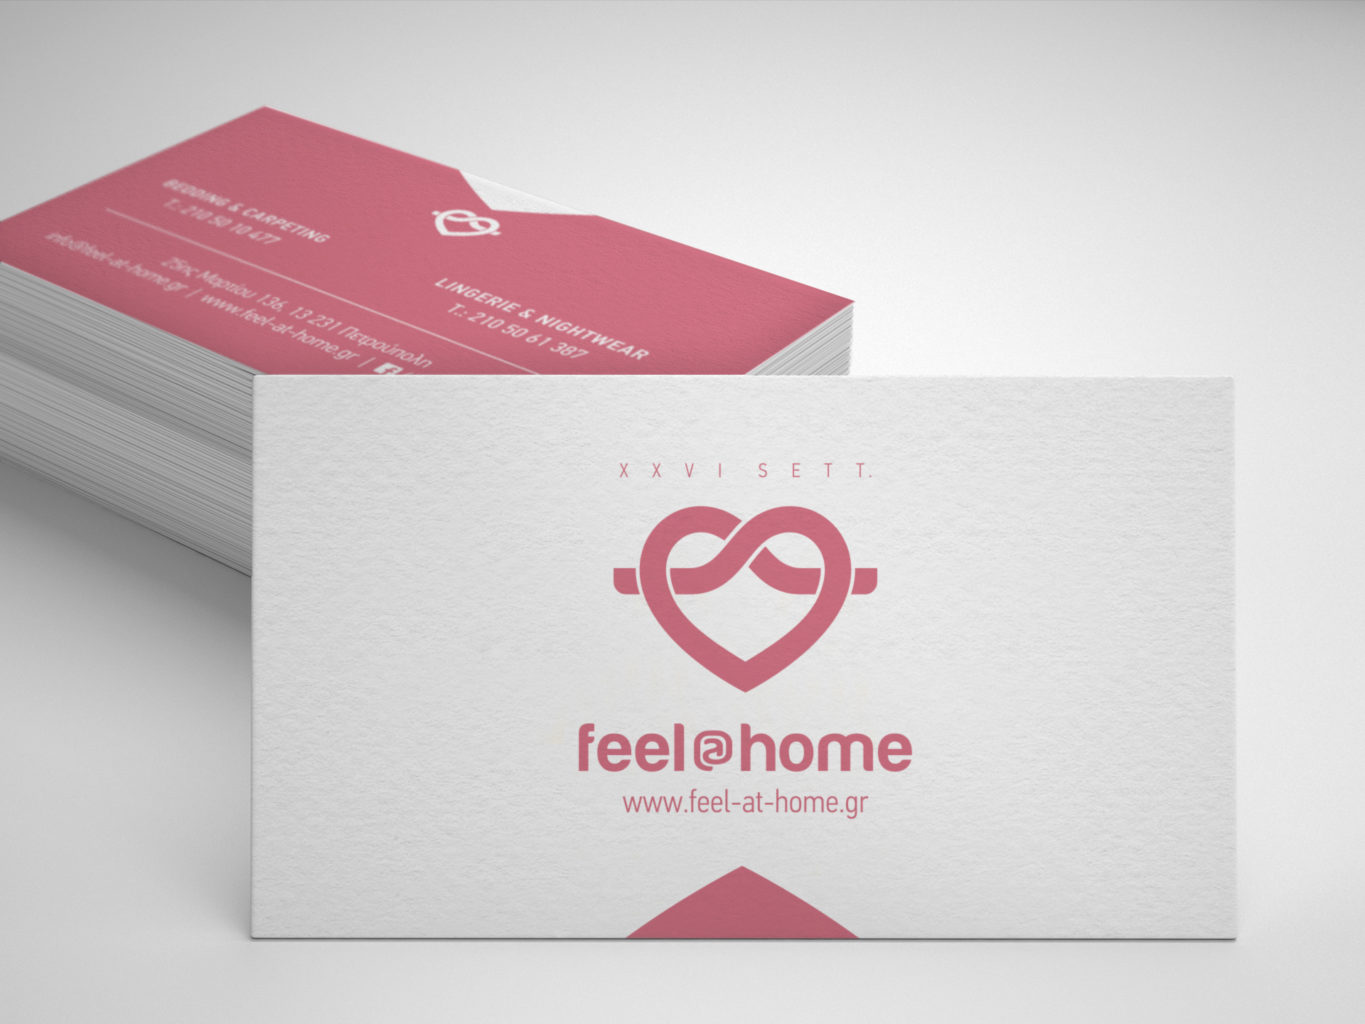 Feel at home lingerie and nightwear business cards